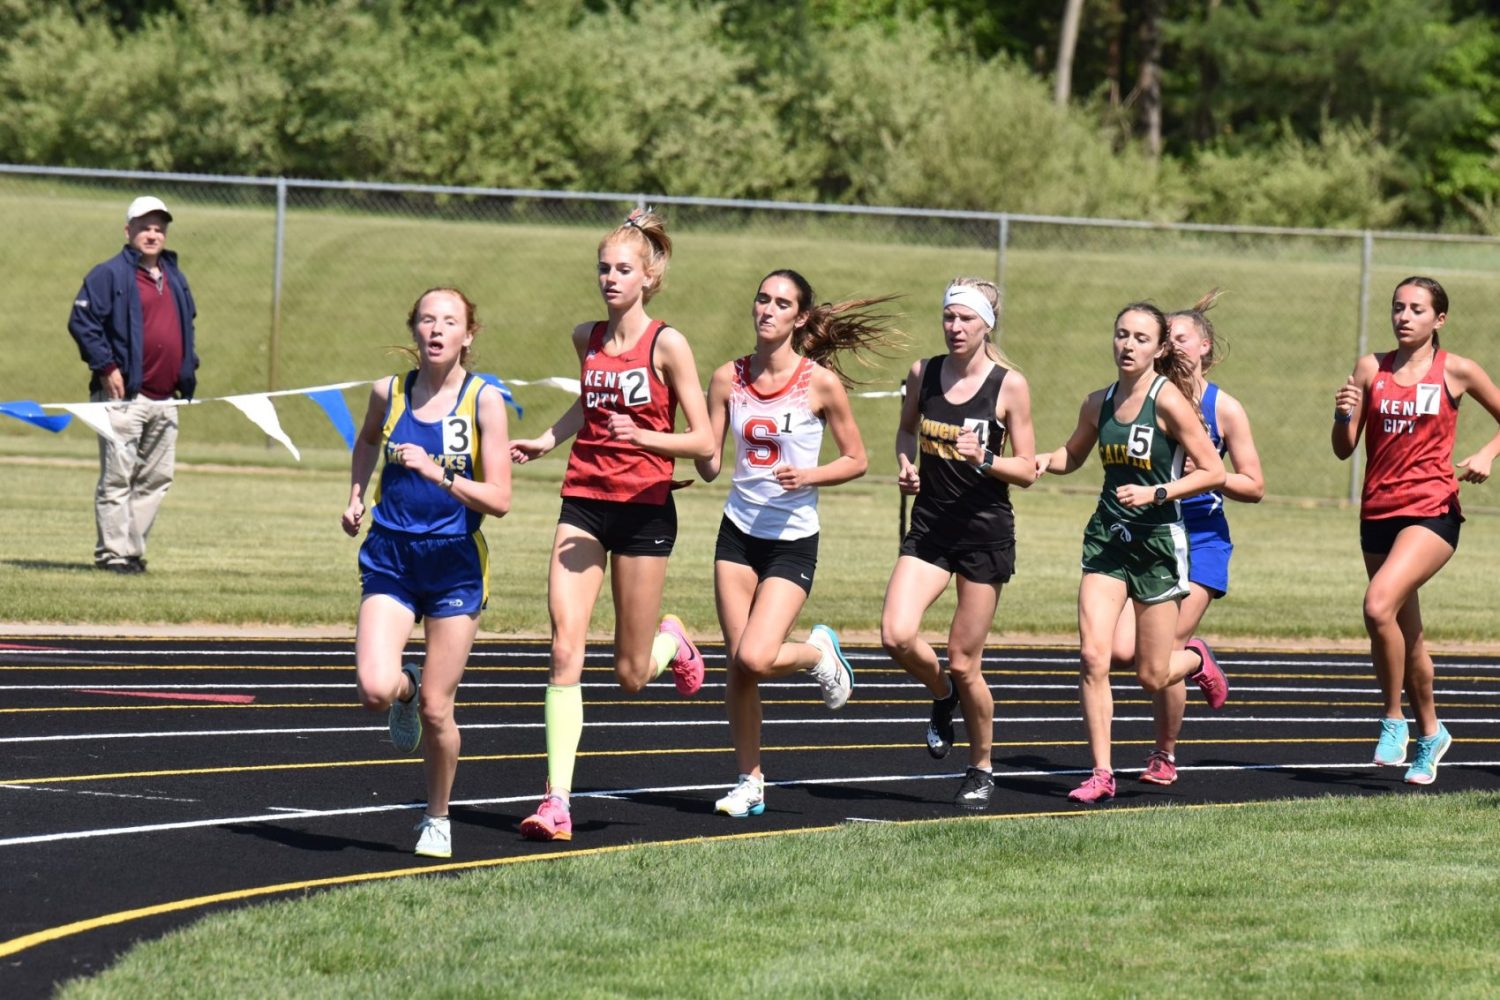 North Muskegon’s Wiegers wins two events at Division 3 regional track meet